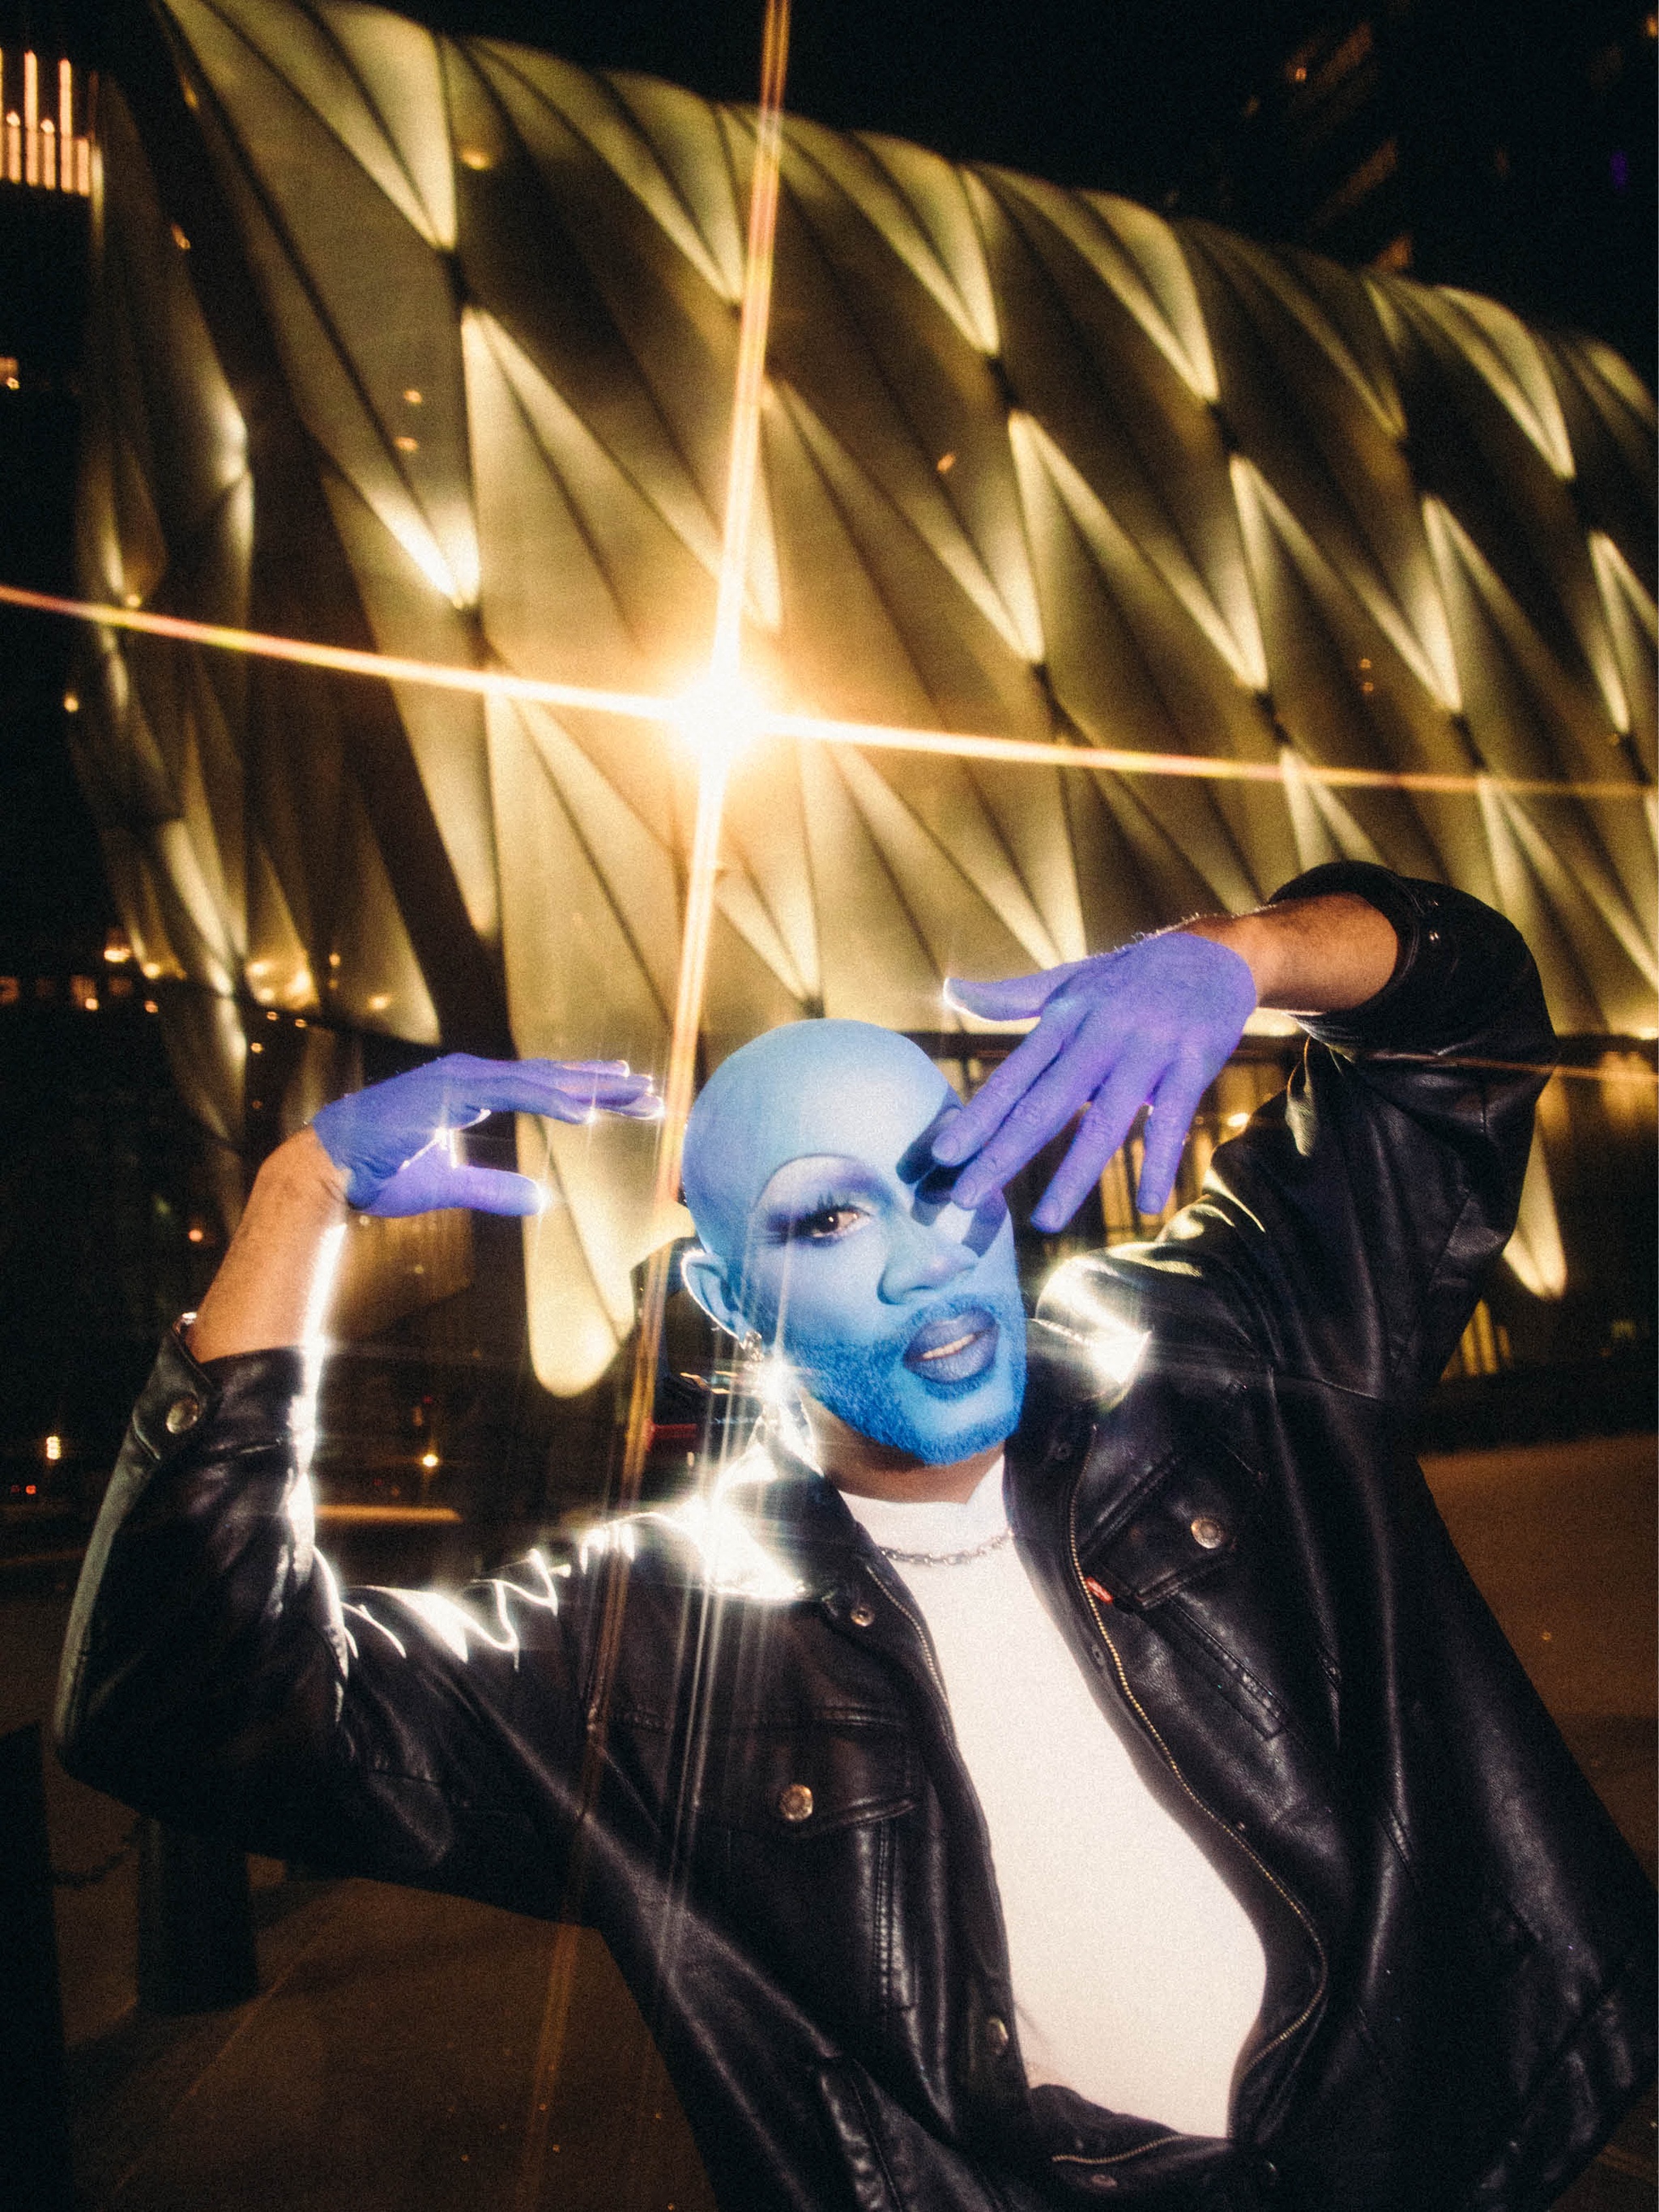 Cain Coleman, a Black multihyphenate drag performer, poses at night outside The Shed with their head and face covered in blue makeup. Cain wears a black leather jacket and white t-shirt, holding their hands, covered in purple makeup to resemble gloves, up to either side of their face. Behind them, lights flash off the reflective surface of The Shed in small starbursts. 